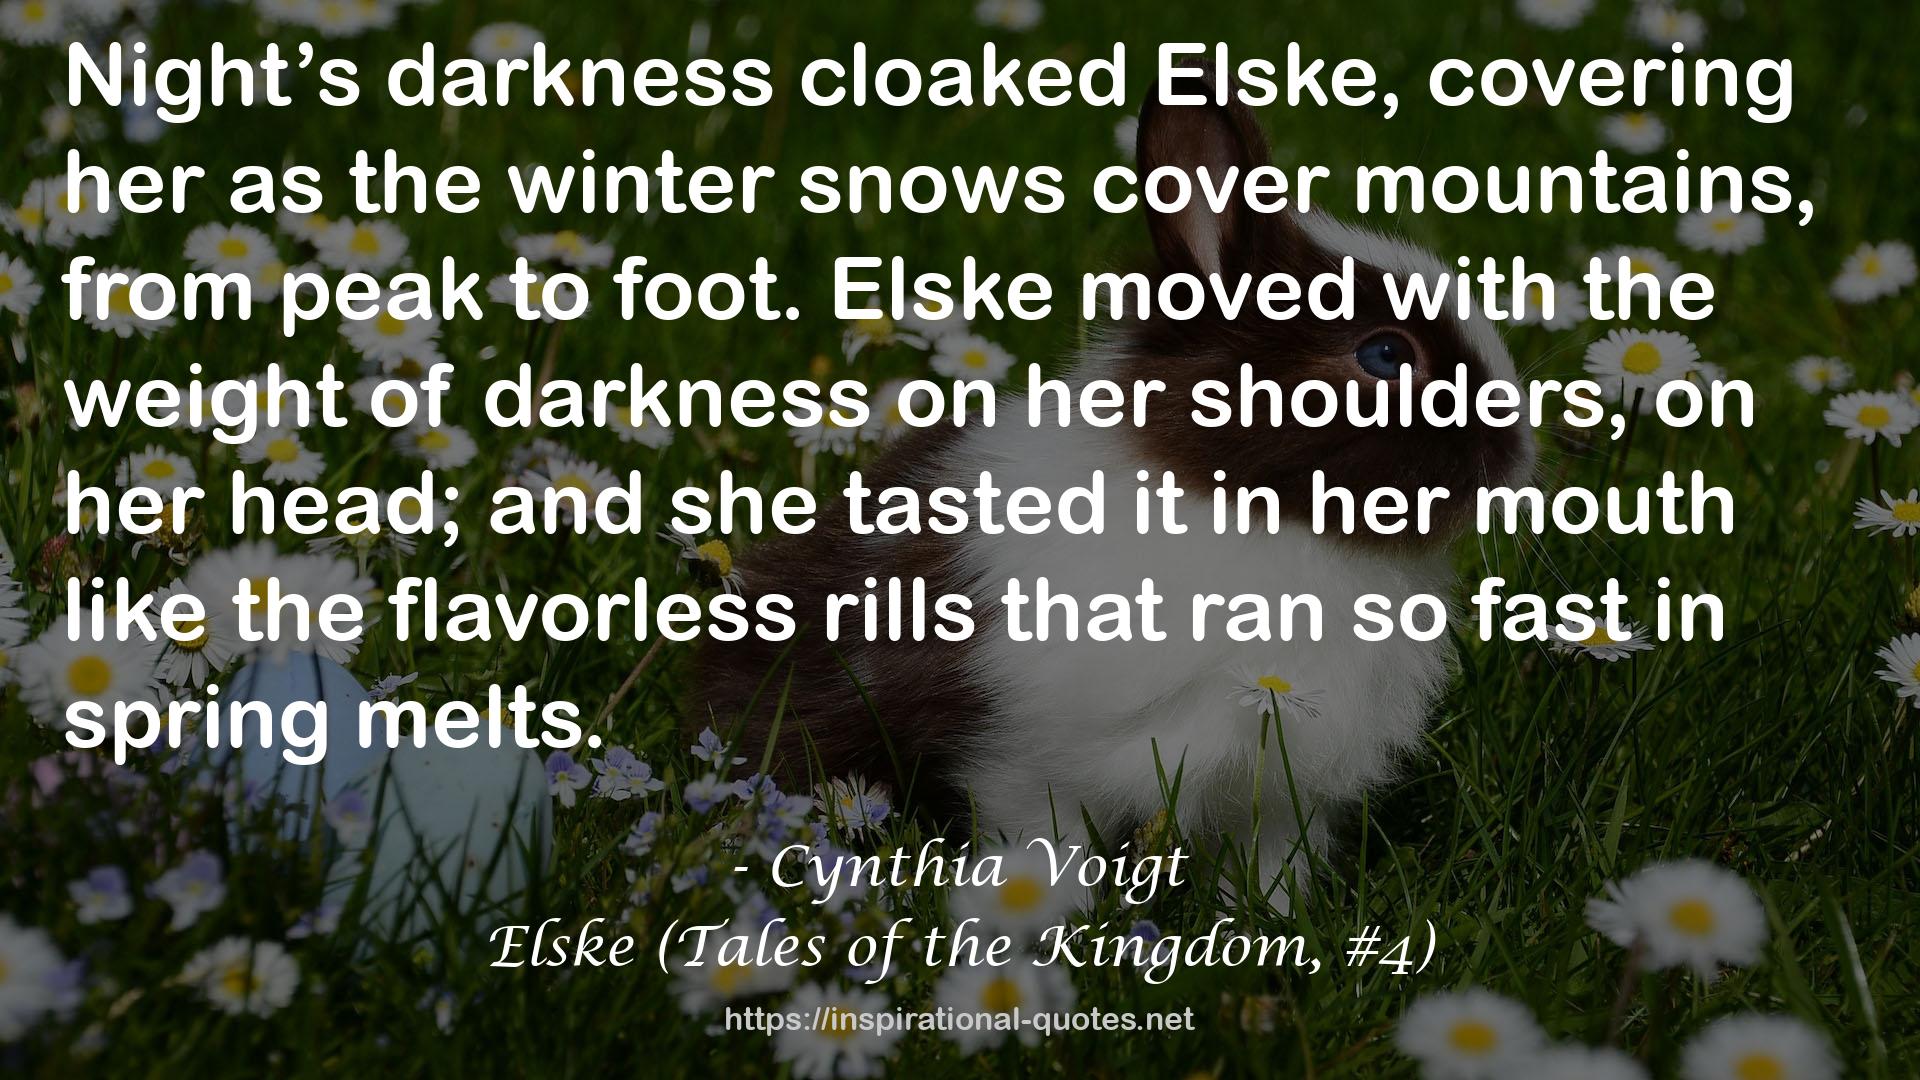 Elske (Tales of the Kingdom, #4) QUOTES